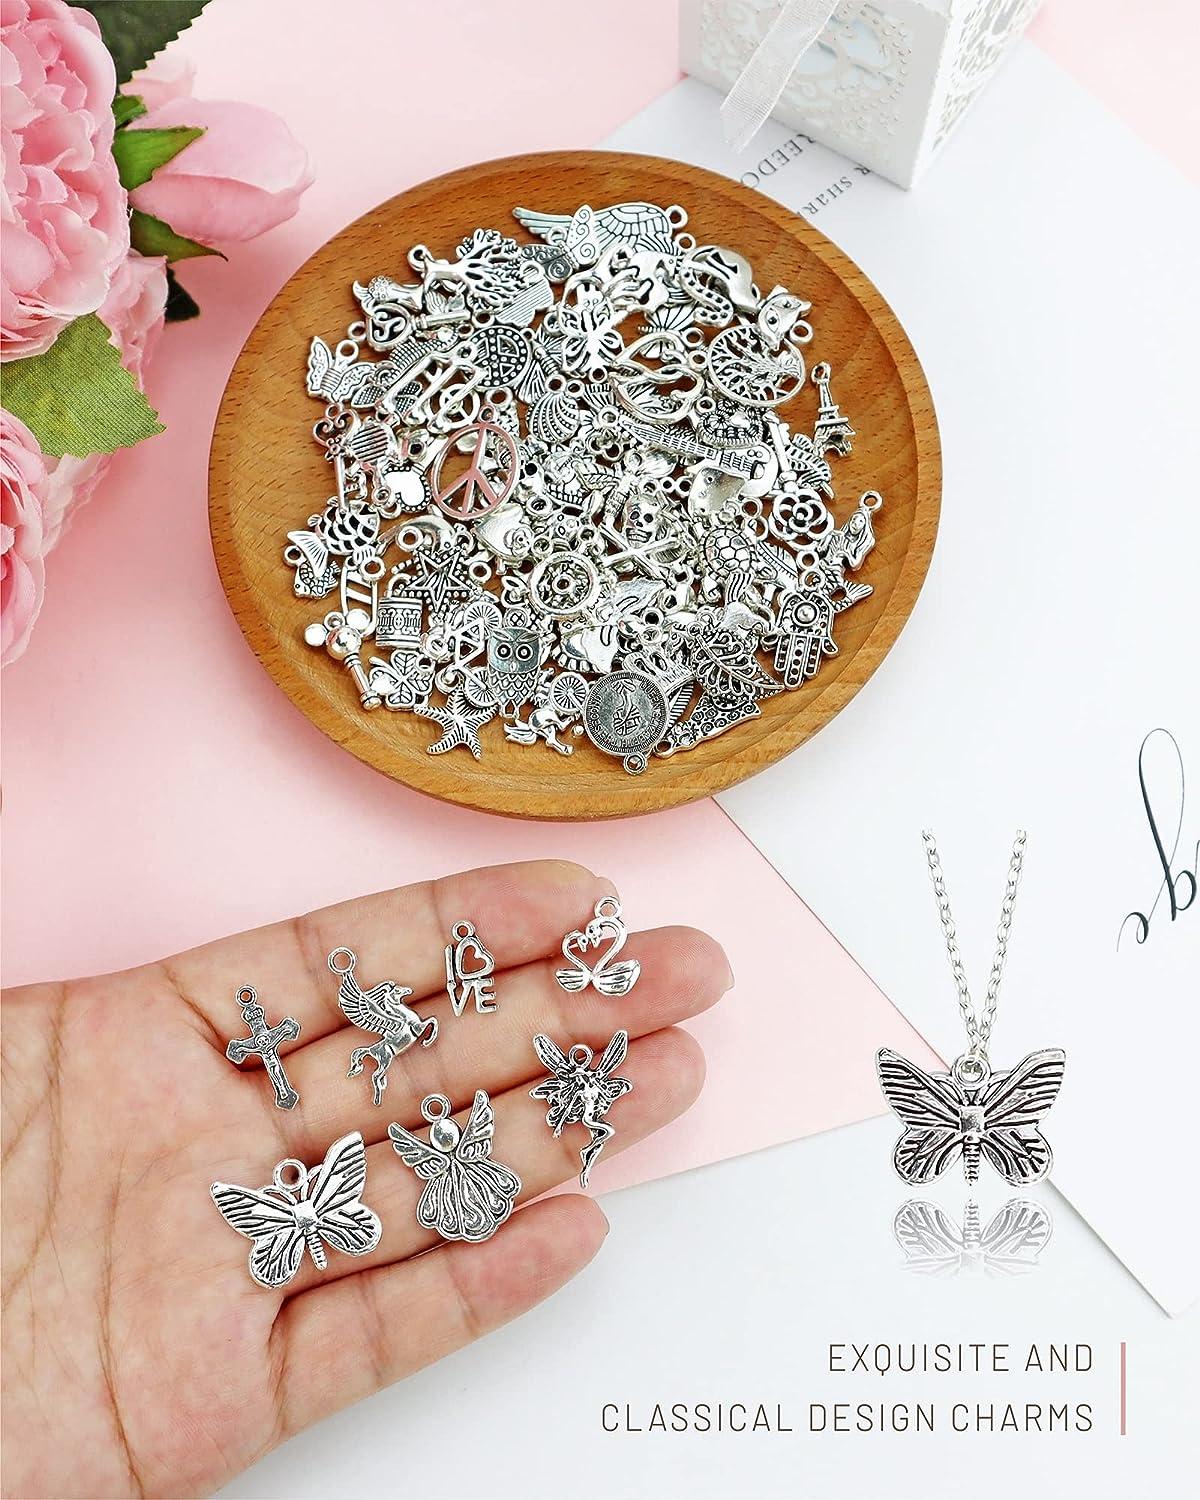  JIALEEY Wholesale Bulk Lots Jewelry Making Silver Charms Mixed  Smooth Tibetan Silver Metal Charms Pendants DIY for Necklace Bracelet  Jewelry Making and Crafting, 100 PCS : JIALEEY: Arts, Crafts & Sewing